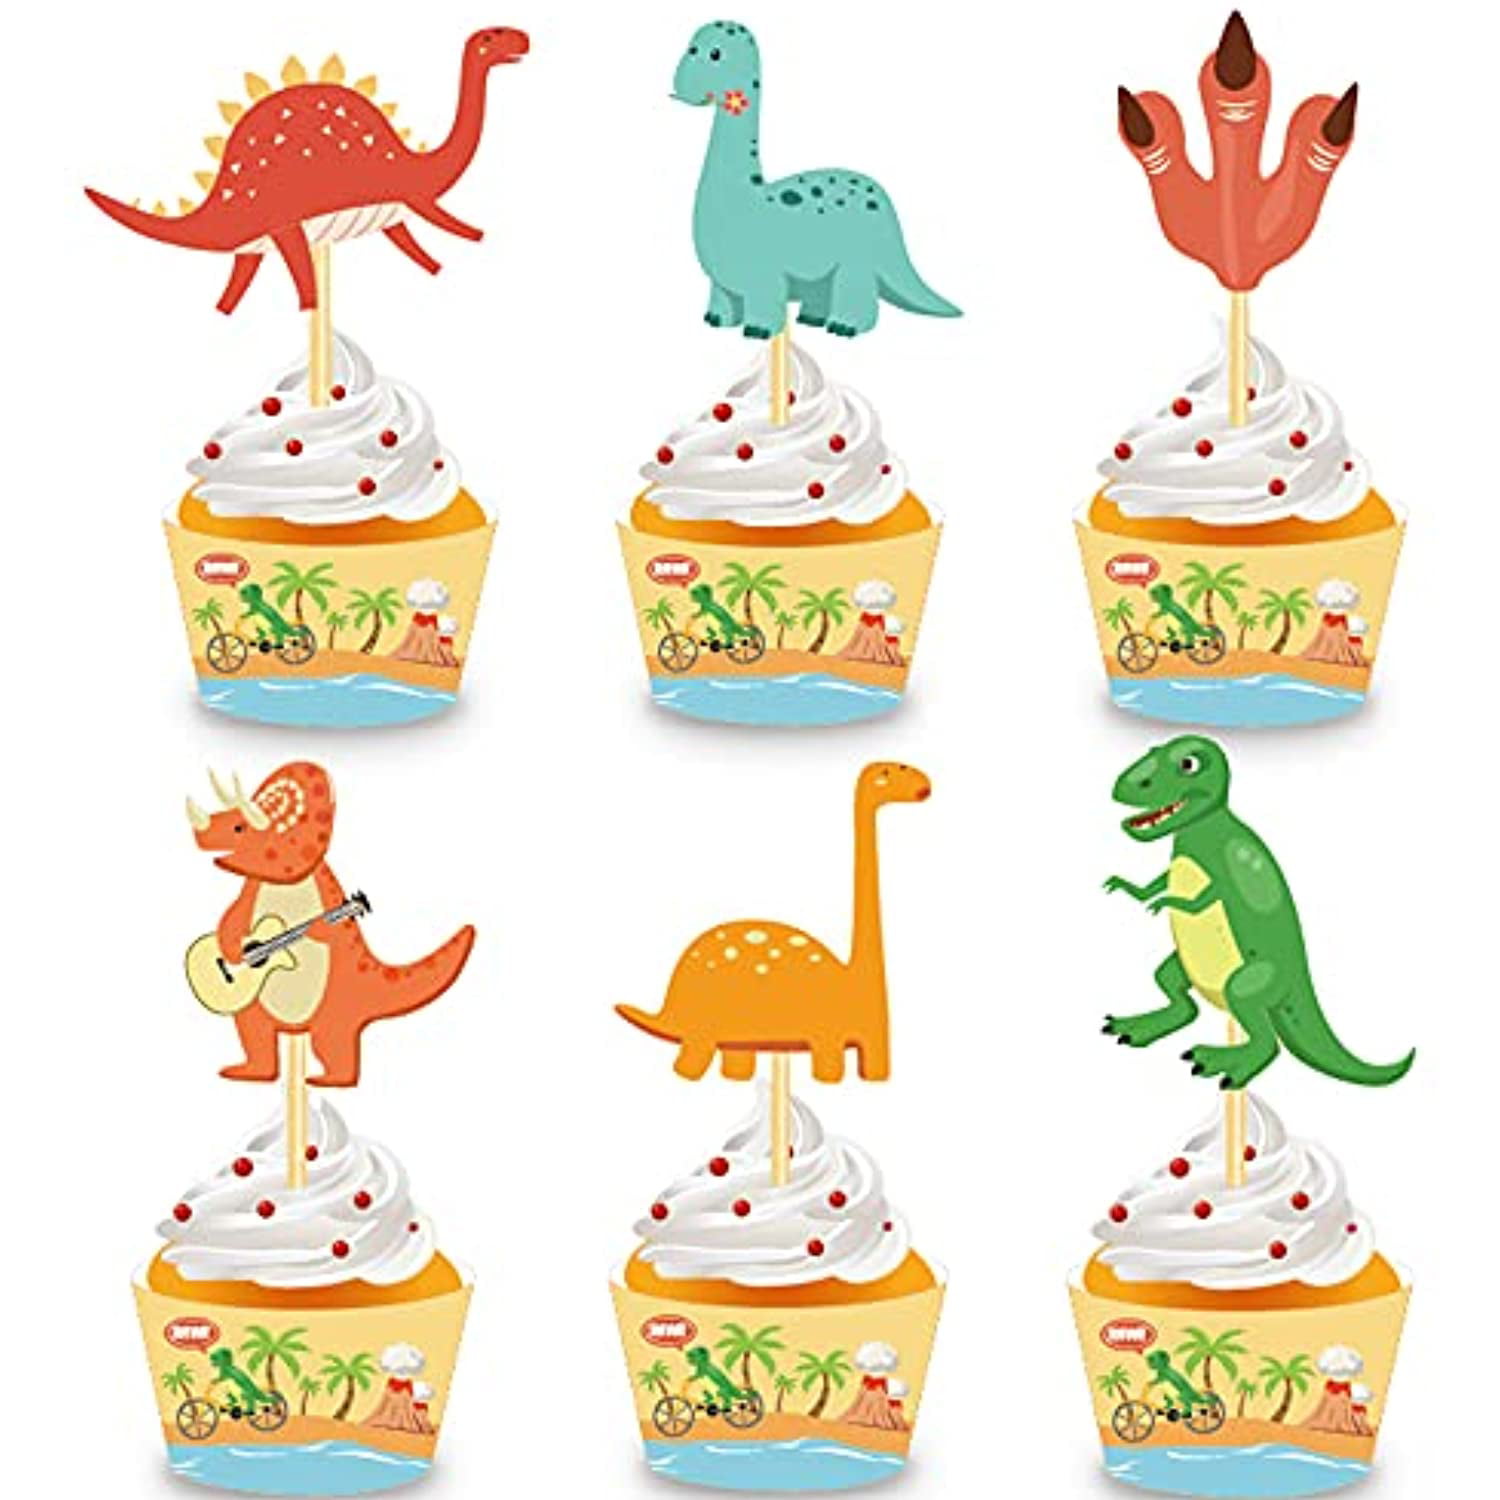 24x Dinosaur Cupcake Wrappers Toppers Child Birthday Party Supply Cake Decor New 